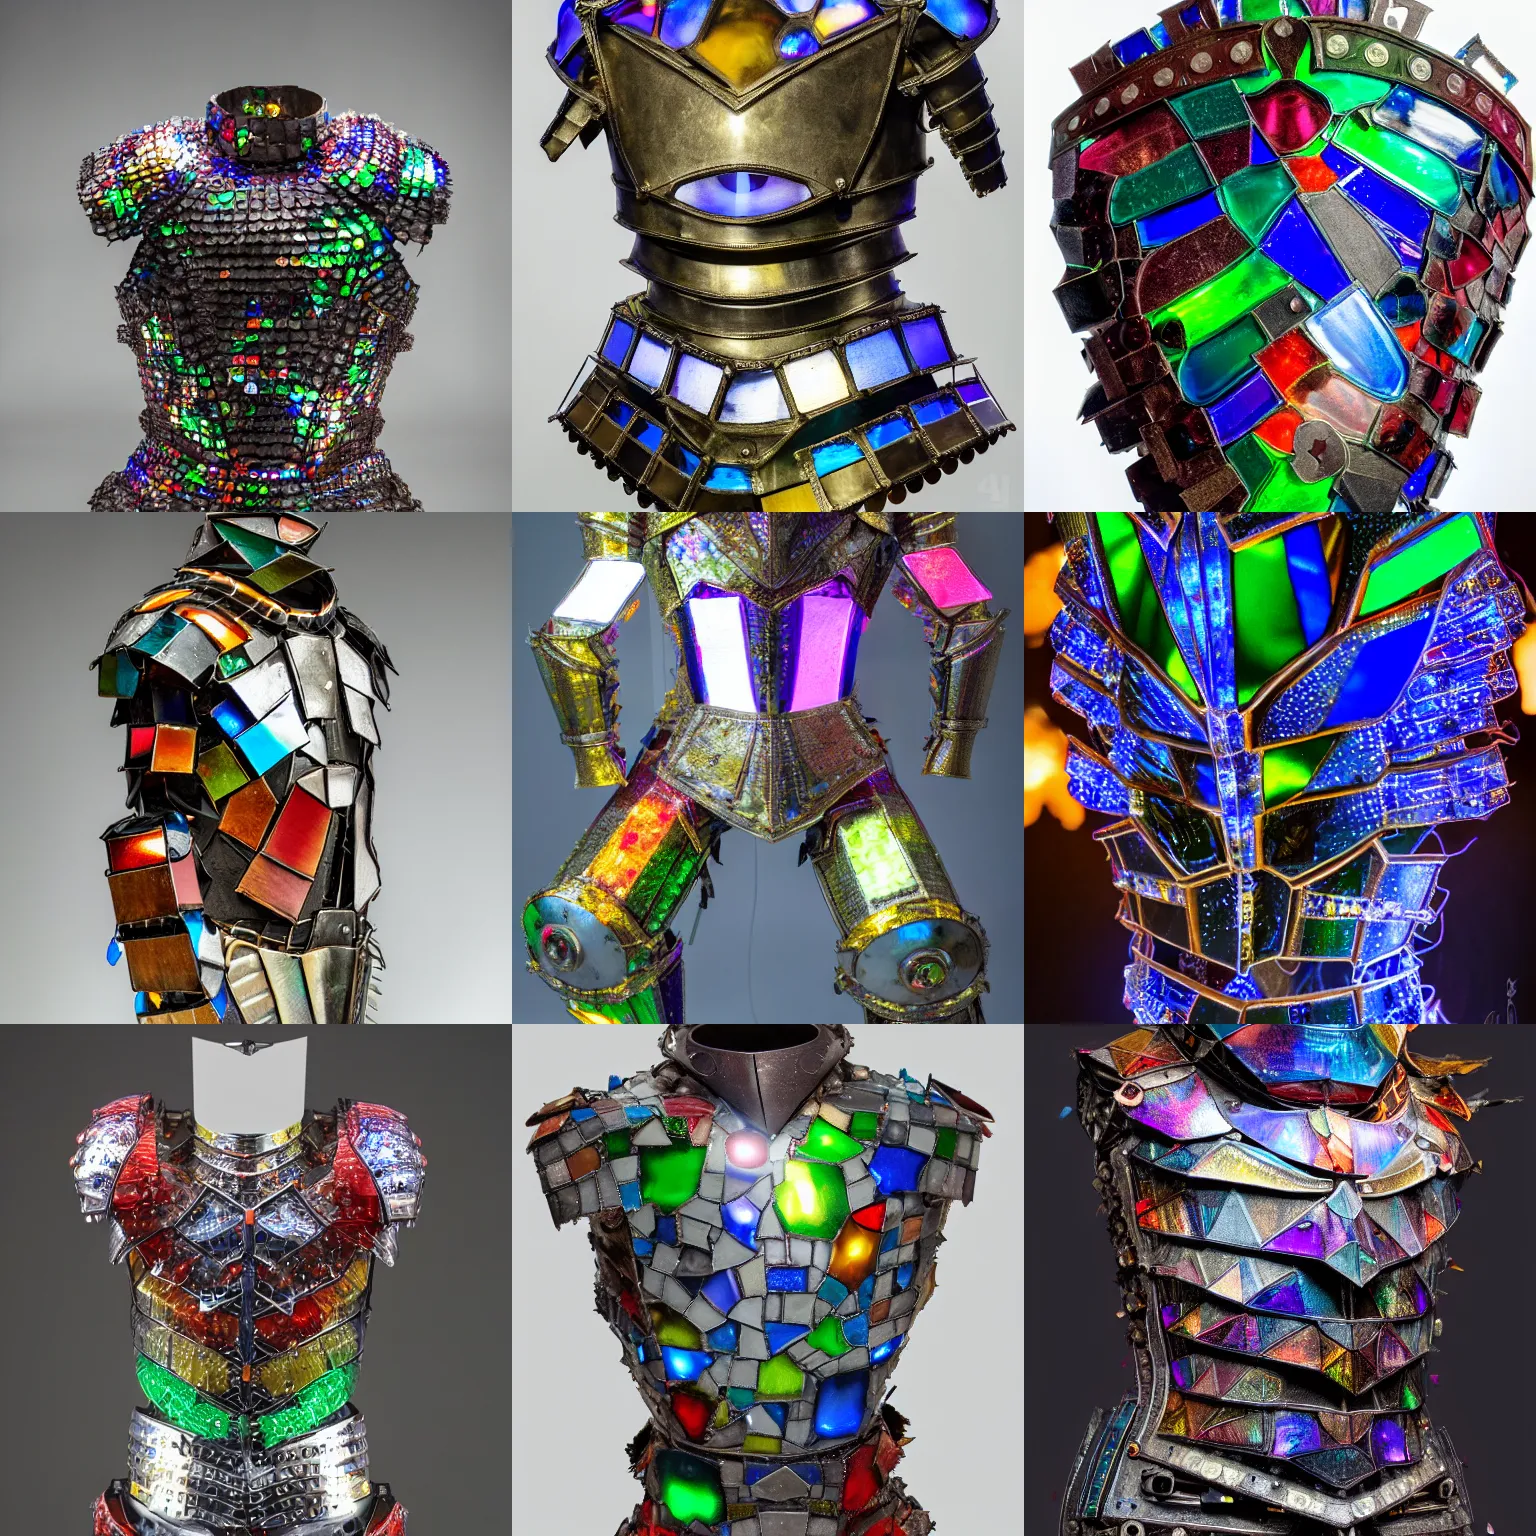 Prompt: armor made of colored glass shards by chris wood, shining led lights inside, detailed 4 k photo